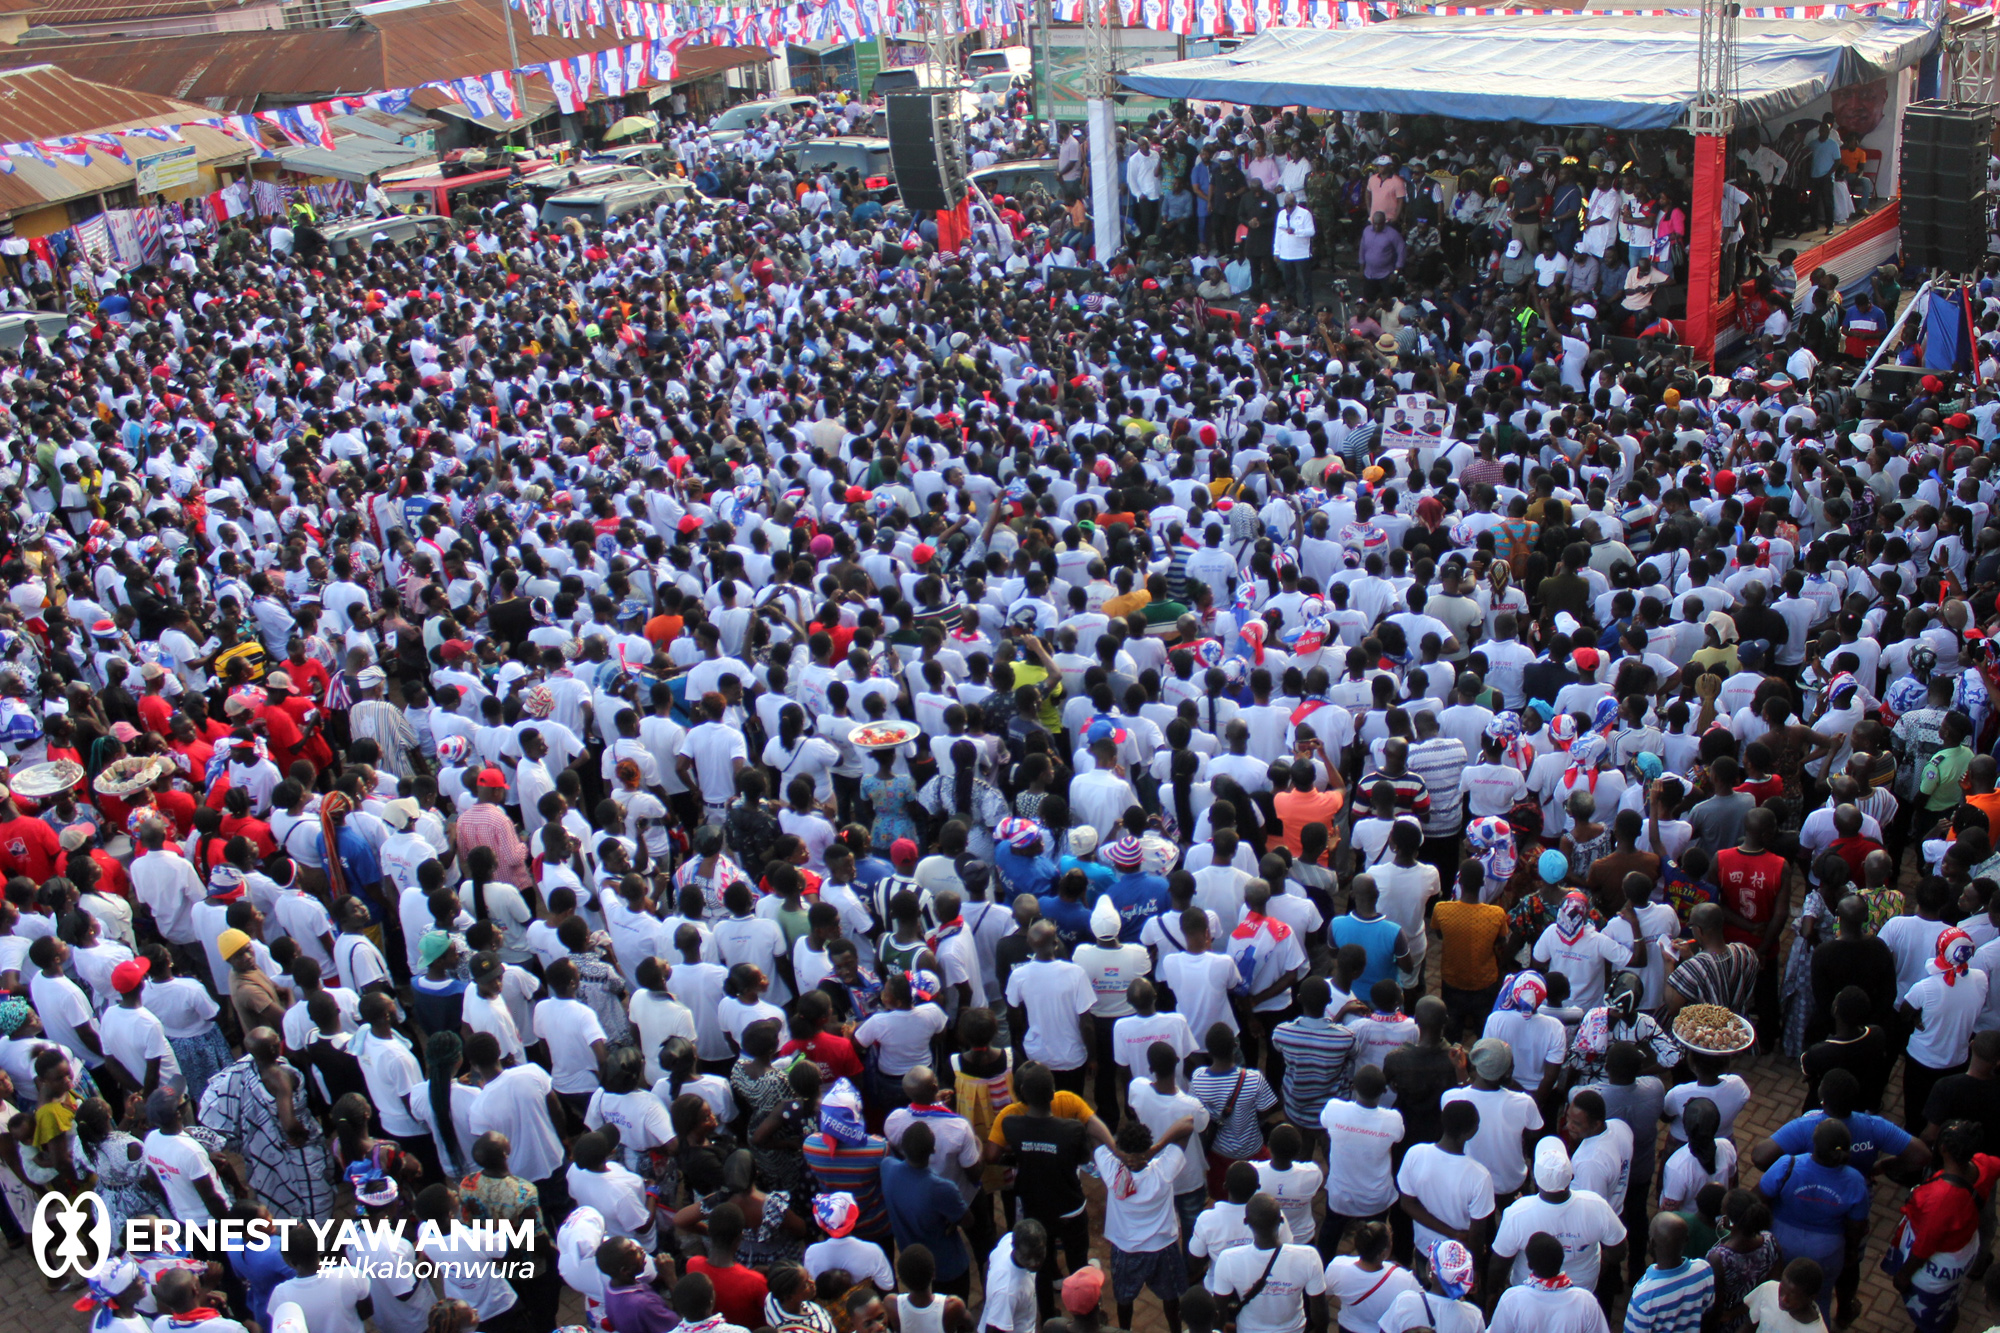 President Akufo-Addo is urging residents of the Kumawu constituency to cast a sizable number of ballots in favor of the NPP's candidate.